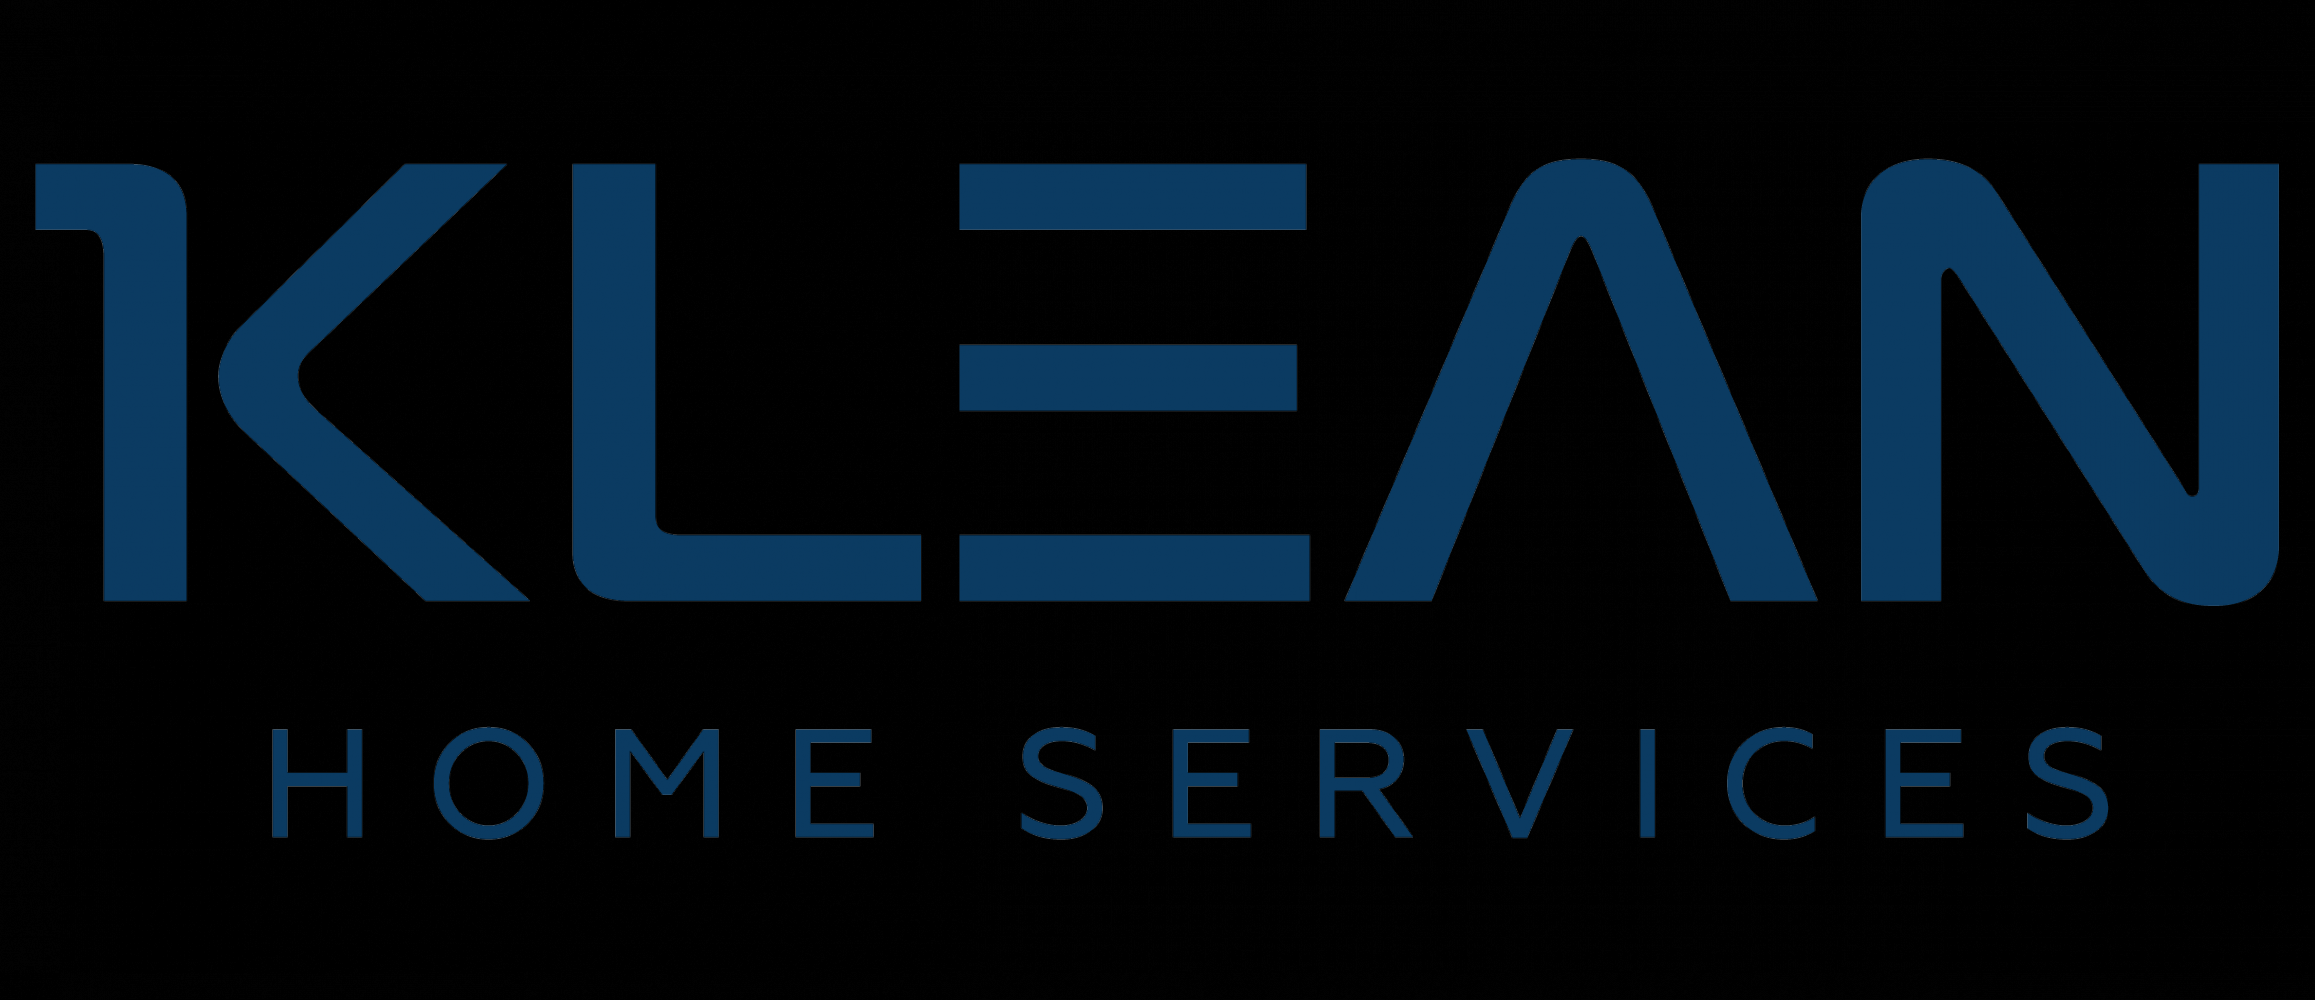 Фото Klean Home Services - Астана